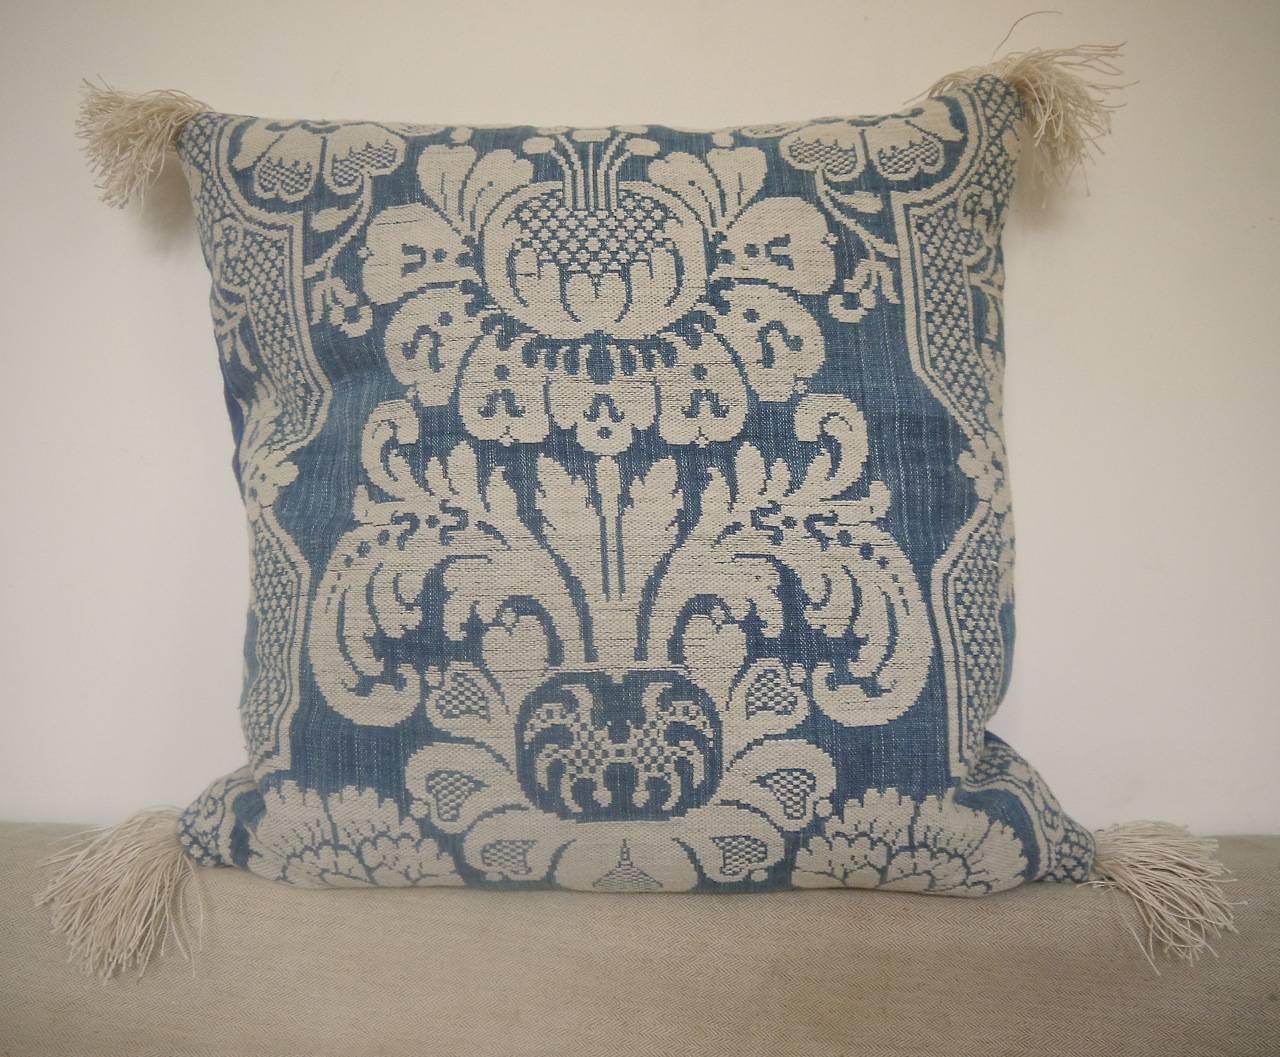 French, circa 1760s woven linen and cotton cushion. Wonderful texture and contrast of weaves and yarns. Antique French linen fringes at each corner and backed in a dyed French 19th century linen. Slipstitched closed with duck feather insert.